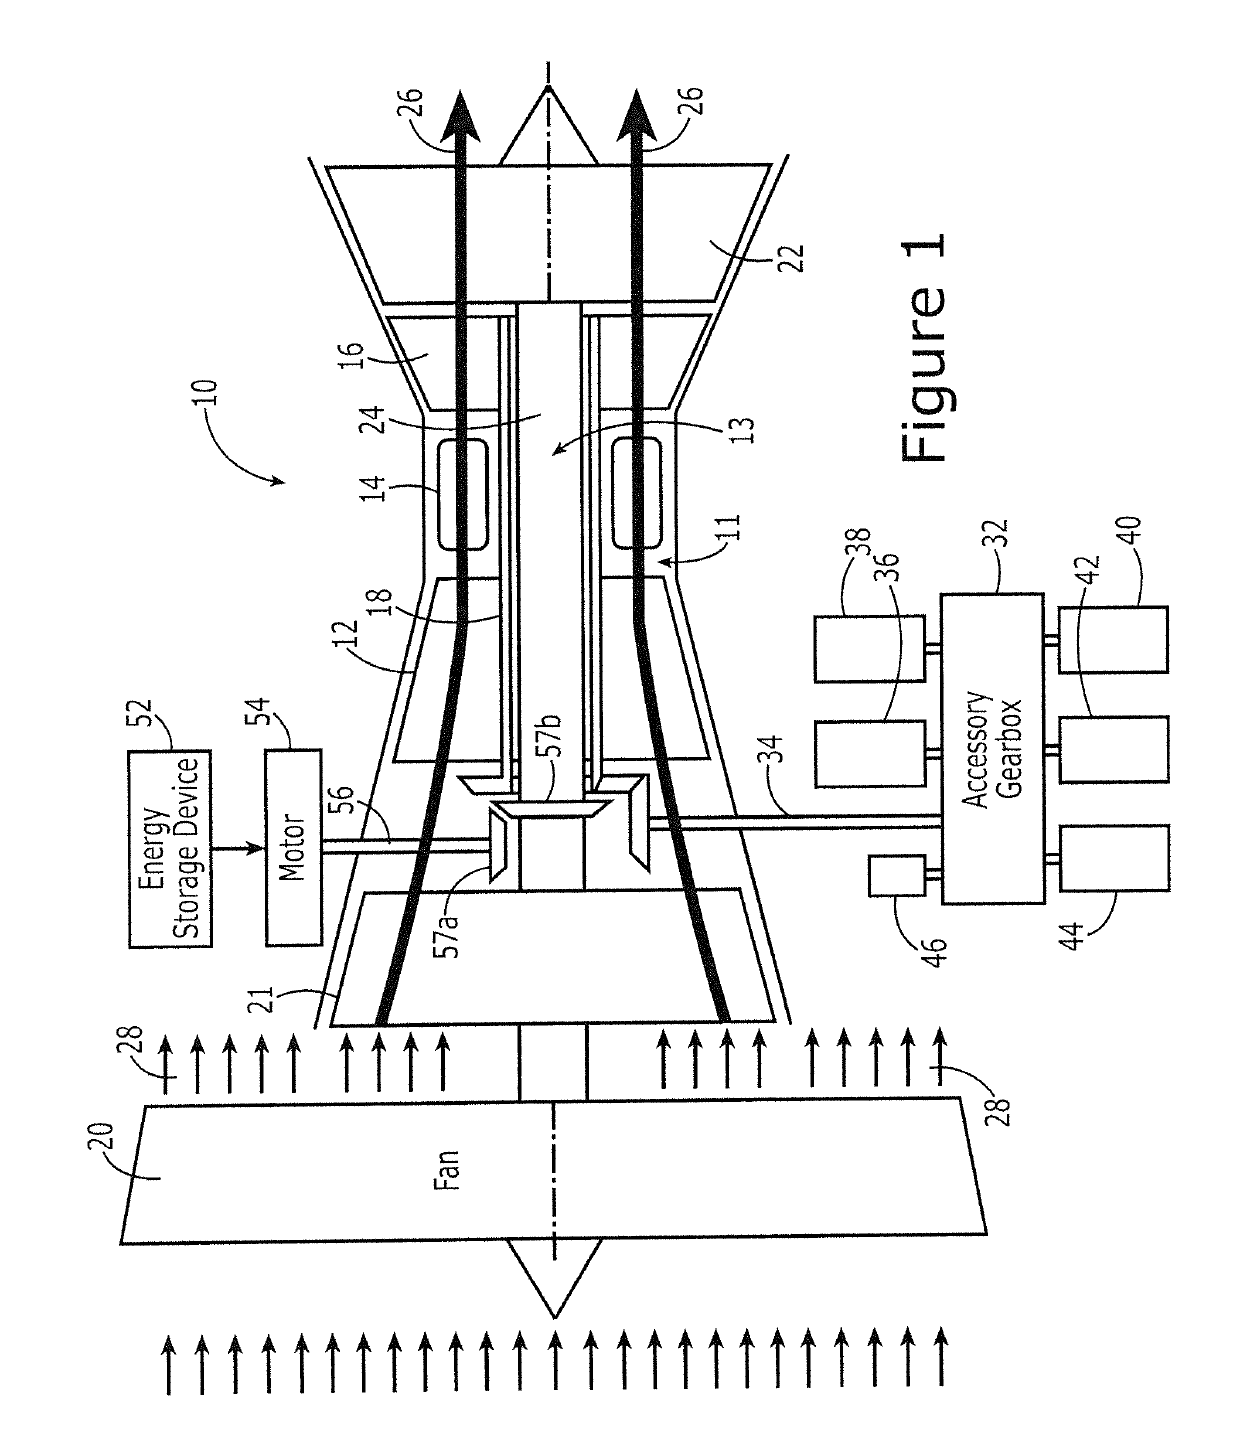 Aircraft engine and associated method for driving the fan with the low pressure shaft during taxi operations